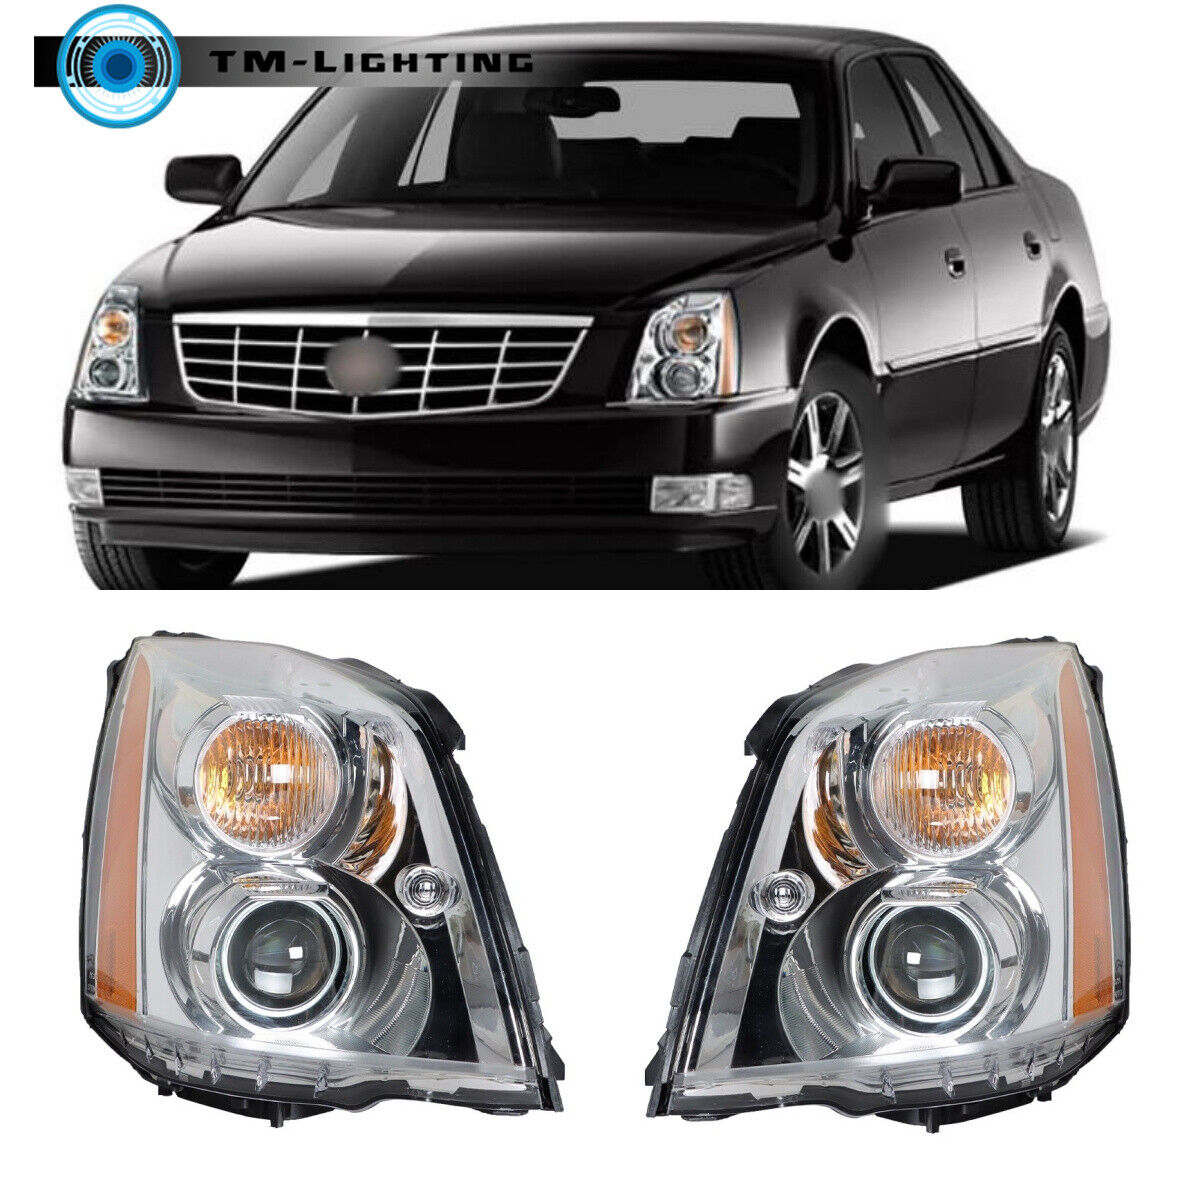 For 2008 2009 2010 2011 Cadillac DTS HID Projector Headlight Headlamp Left&Right